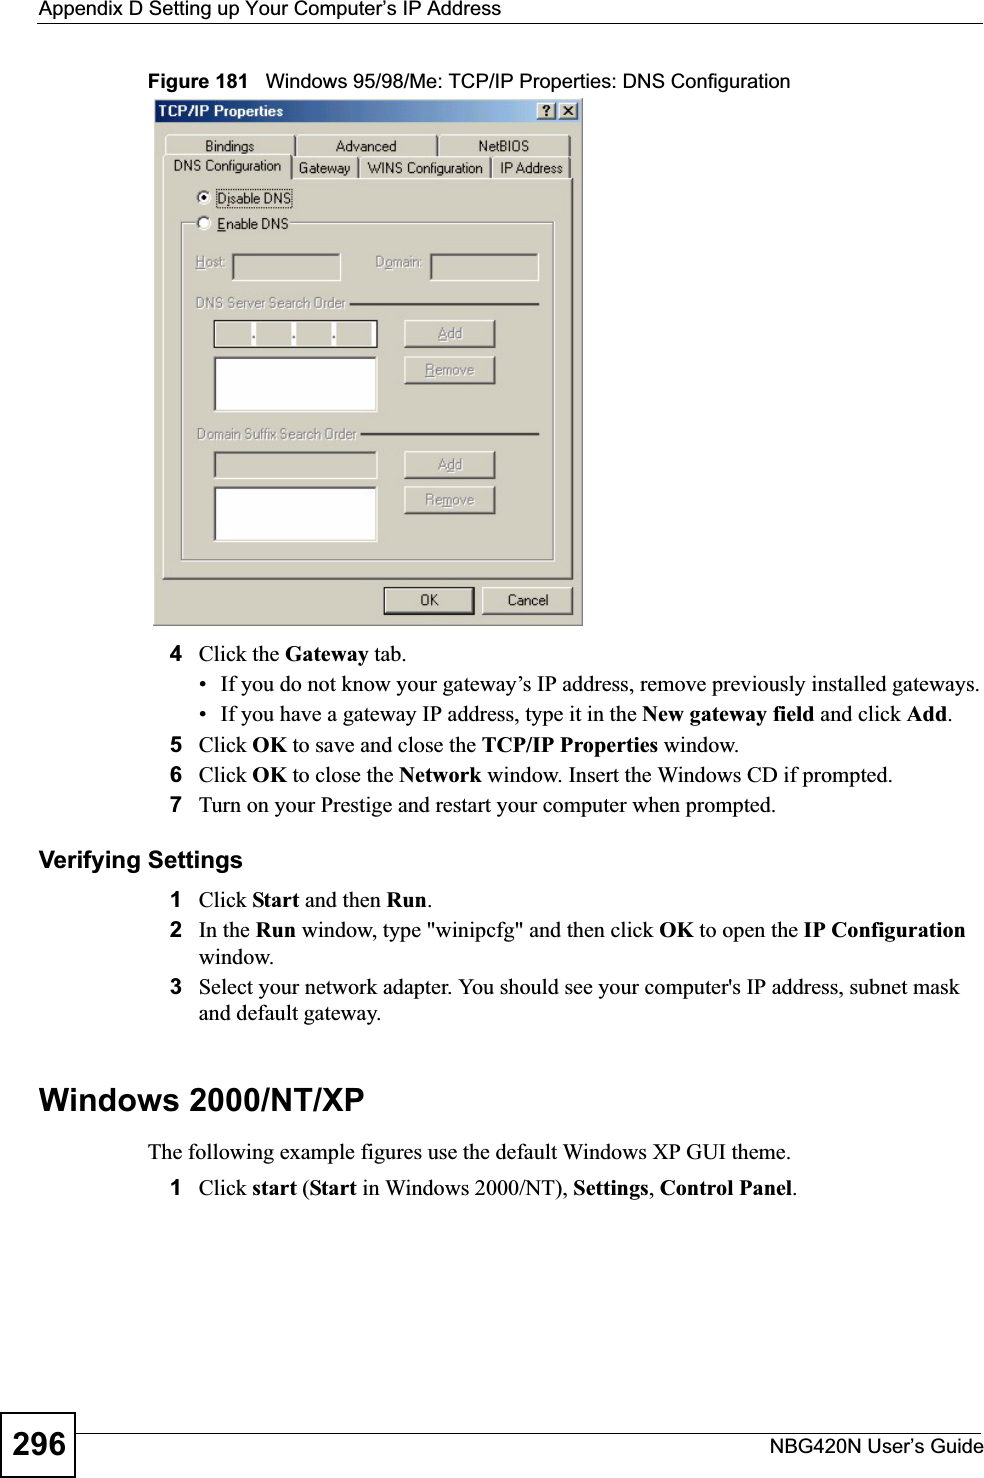 Appendix D Setting up Your Computer’s IP AddressNBG420N User’s Guide296Figure 181   Windows 95/98/Me: TCP/IP Properties: DNS Configuration4Click the Gateway tab.• If you do not know your gateway’s IP address, remove previously installed gateways.• If you have a gateway IP address, type it in the New gateway field and click Add.5Click OK to save and close the TCP/IP Properties window.6Click OK to close the Network window. Insert the Windows CD if prompted.7Turn on your Prestige and restart your computer when prompted.Verifying Settings1Click Start and then Run.2In the Run window, type &quot;winipcfg&quot; and then click OK to open the IP Configurationwindow.3Select your network adapter. You should see your computer&apos;s IP address, subnet mask and default gateway.Windows 2000/NT/XPThe following example figures use the default Windows XP GUI theme.1Click start (Start in Windows 2000/NT), Settings,Control Panel.